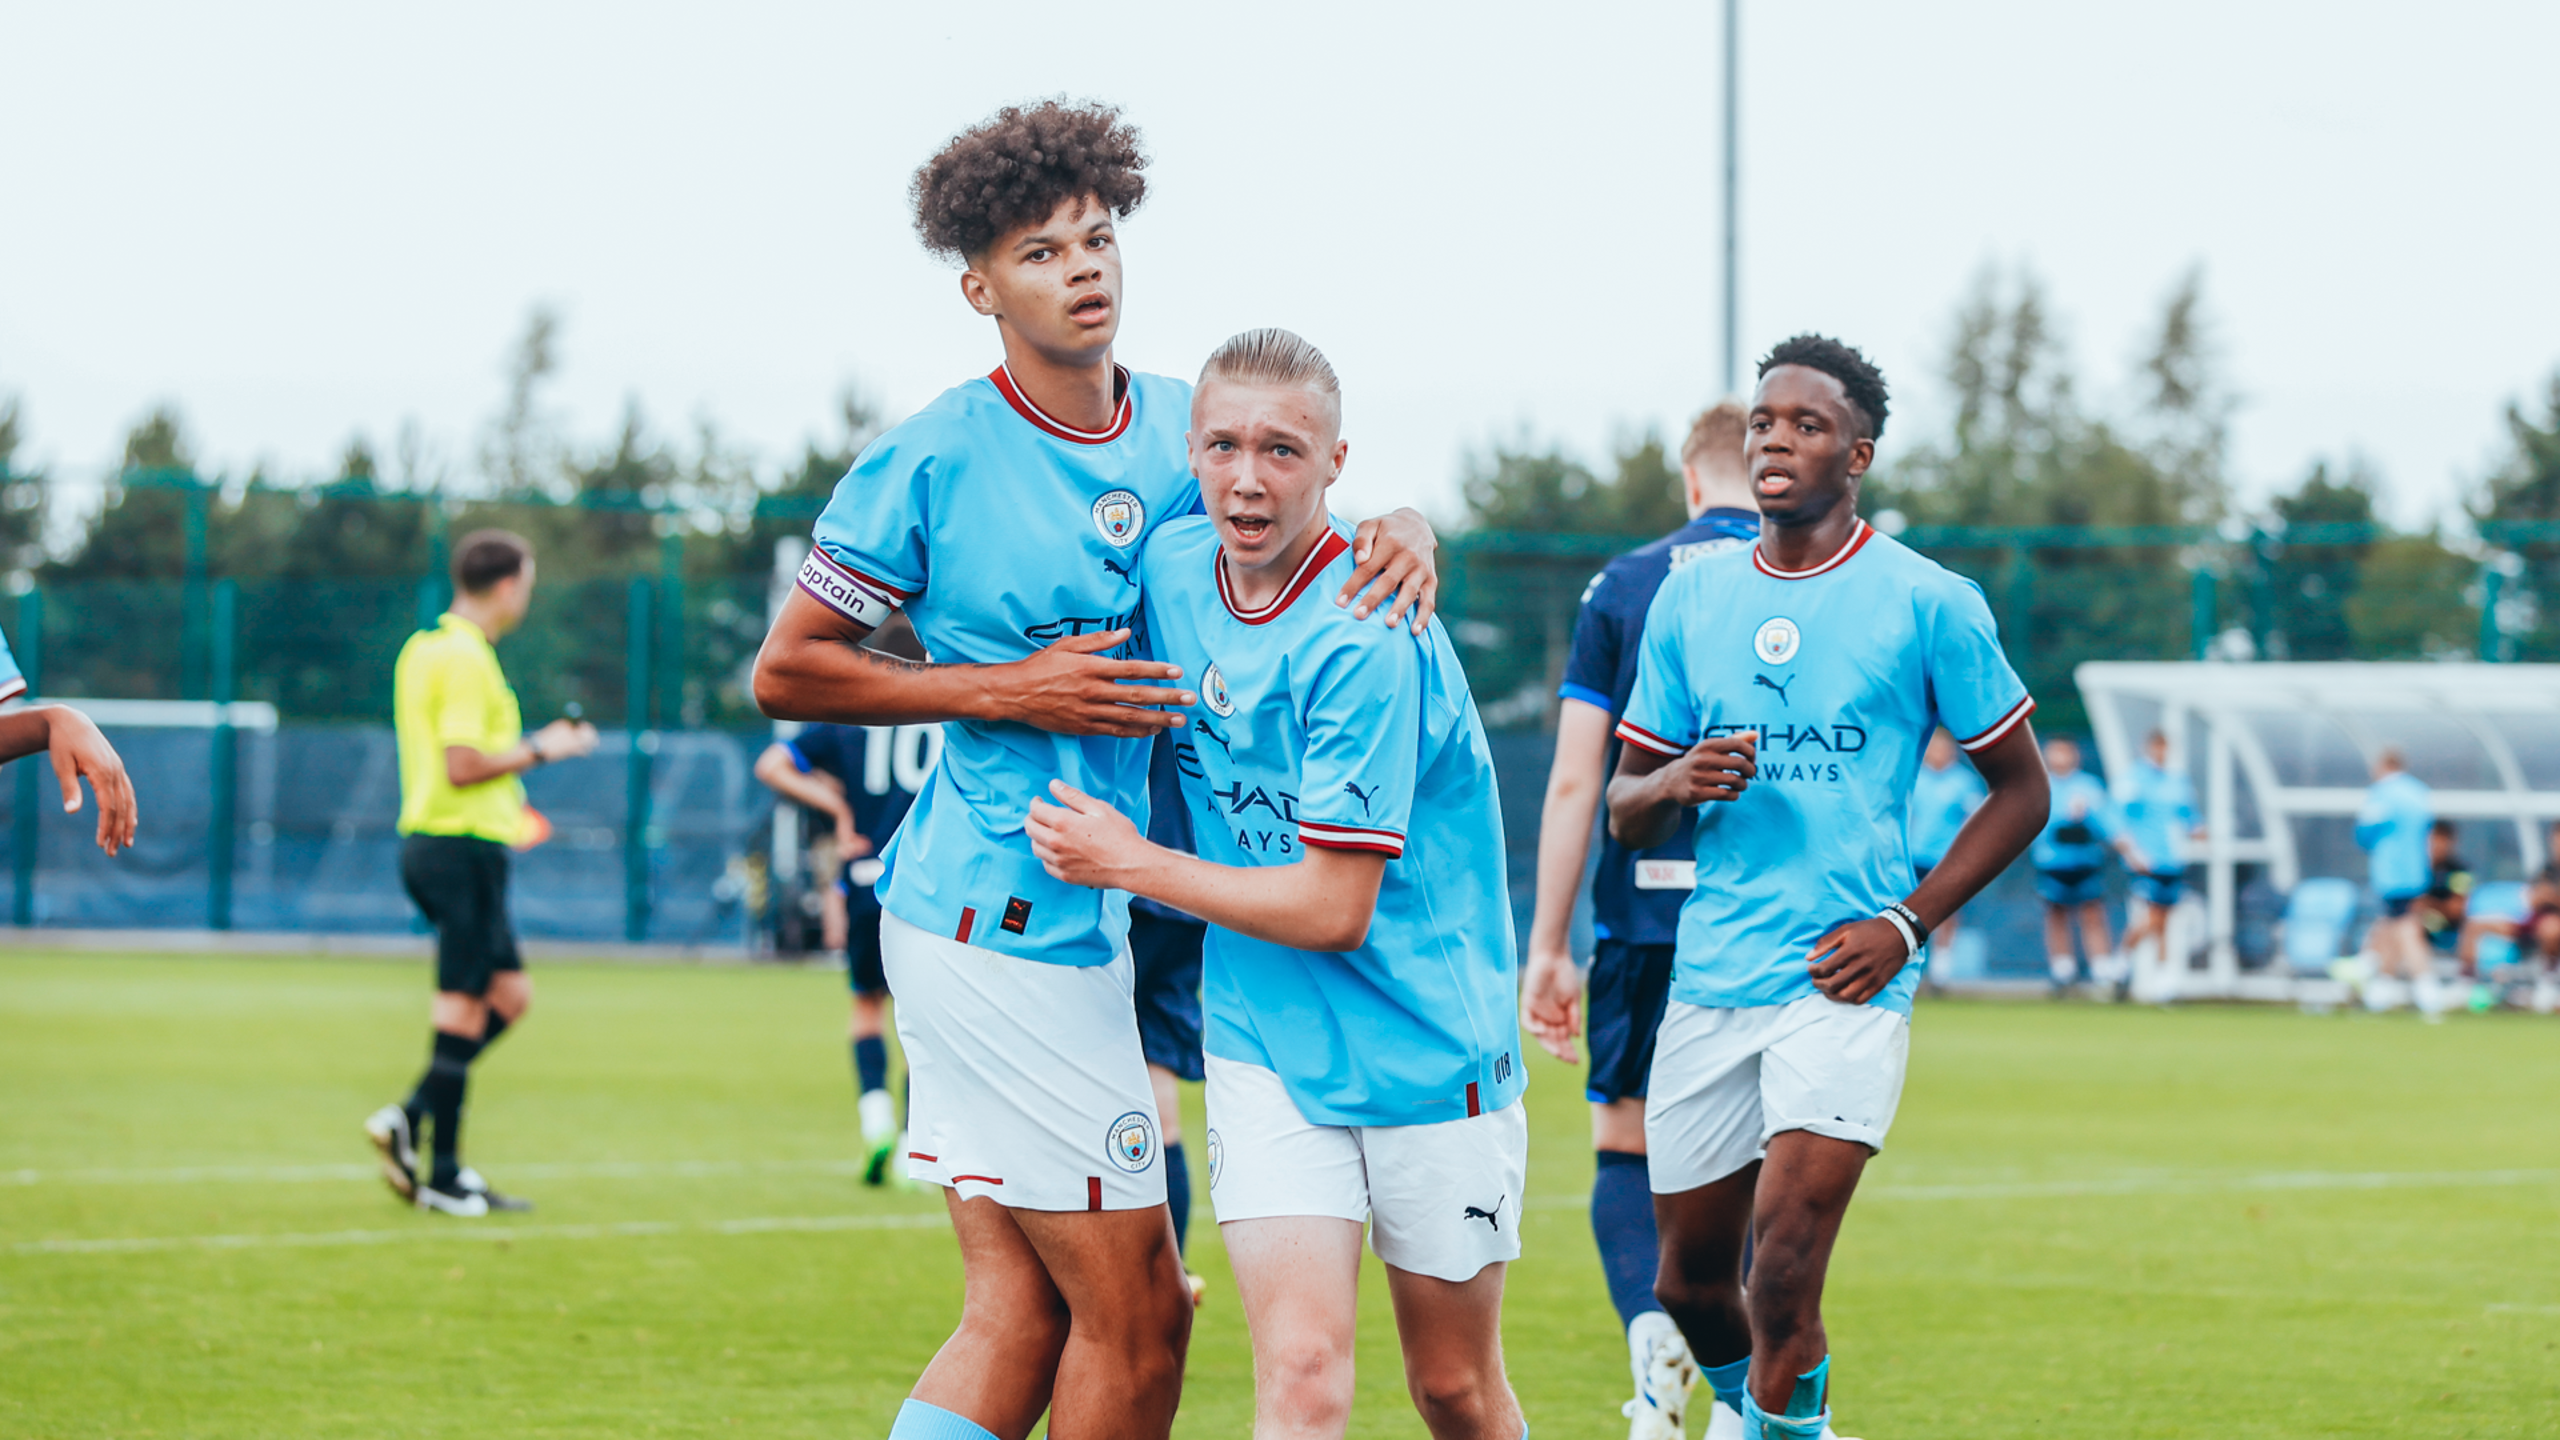 Attacking second half performance puts City top of U18PL North table